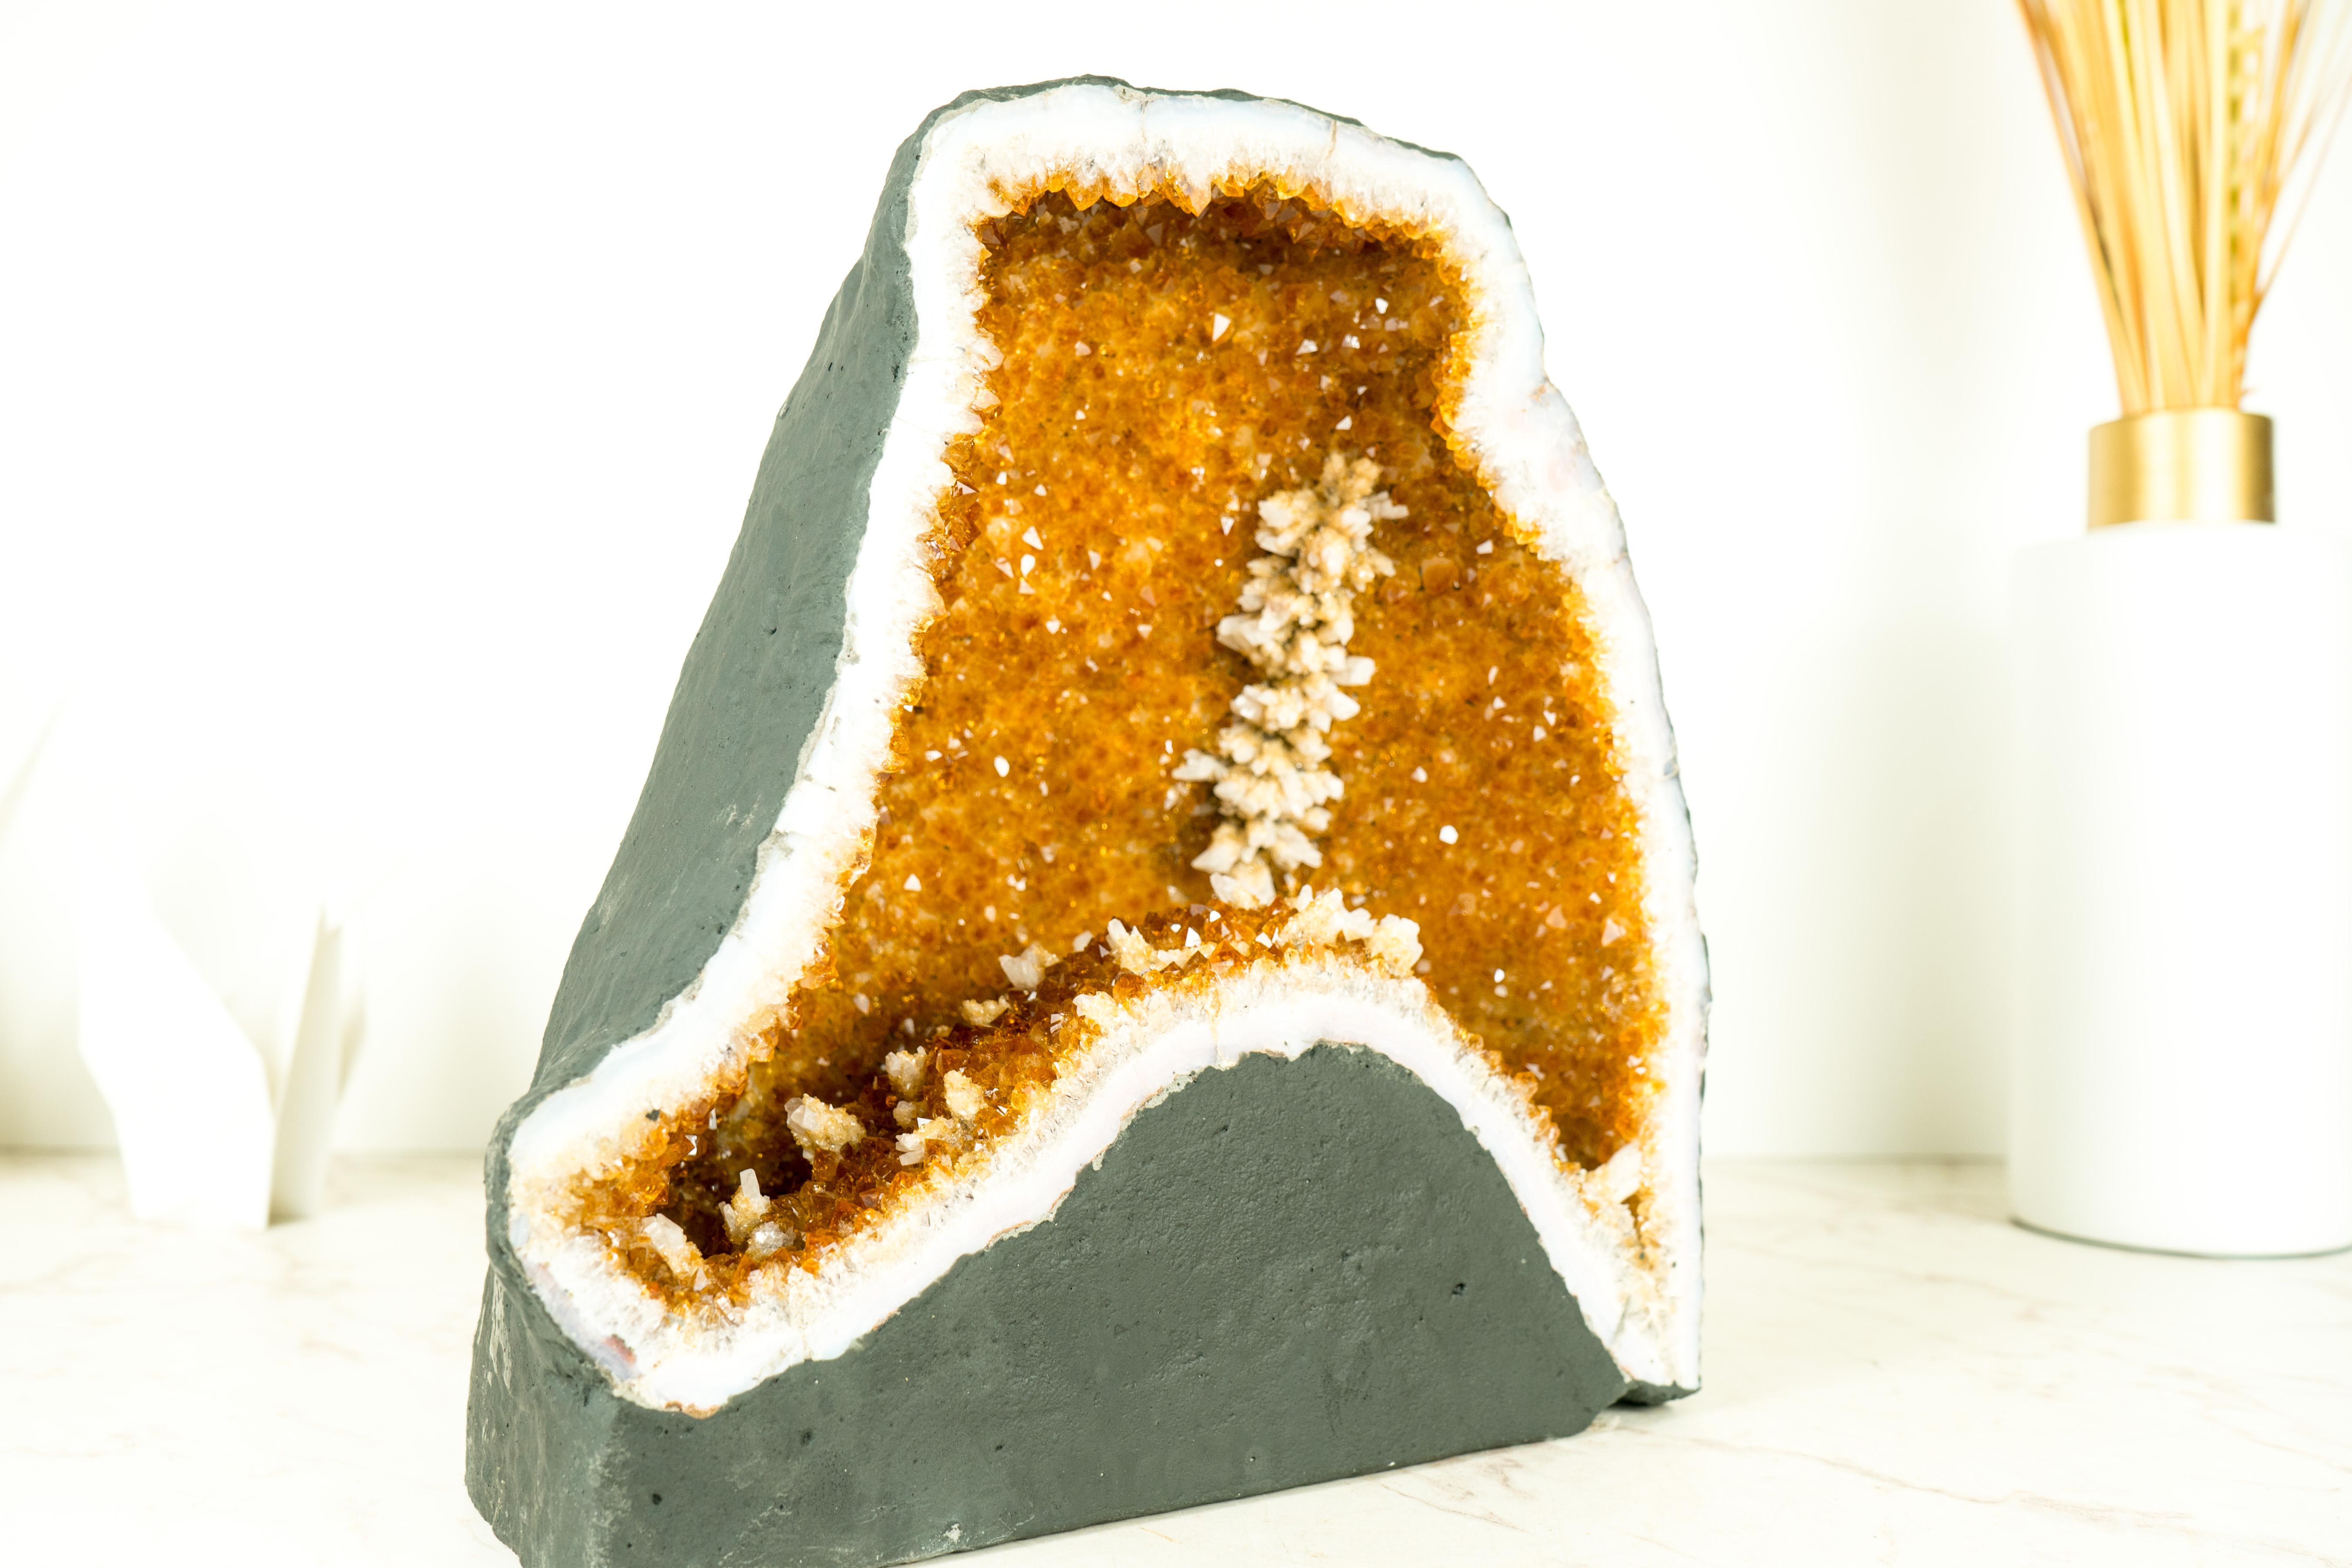 A Breathtaking Citrine Geode Cave with Deep Orange, Sparkly Citrine Druzy and Rare Calcite Flowers

▫️ Description

An extraordinary natural Citrine cave, featuring shiny, rich, saturated orange Citrine Druzy and beautiful formation of Calcite